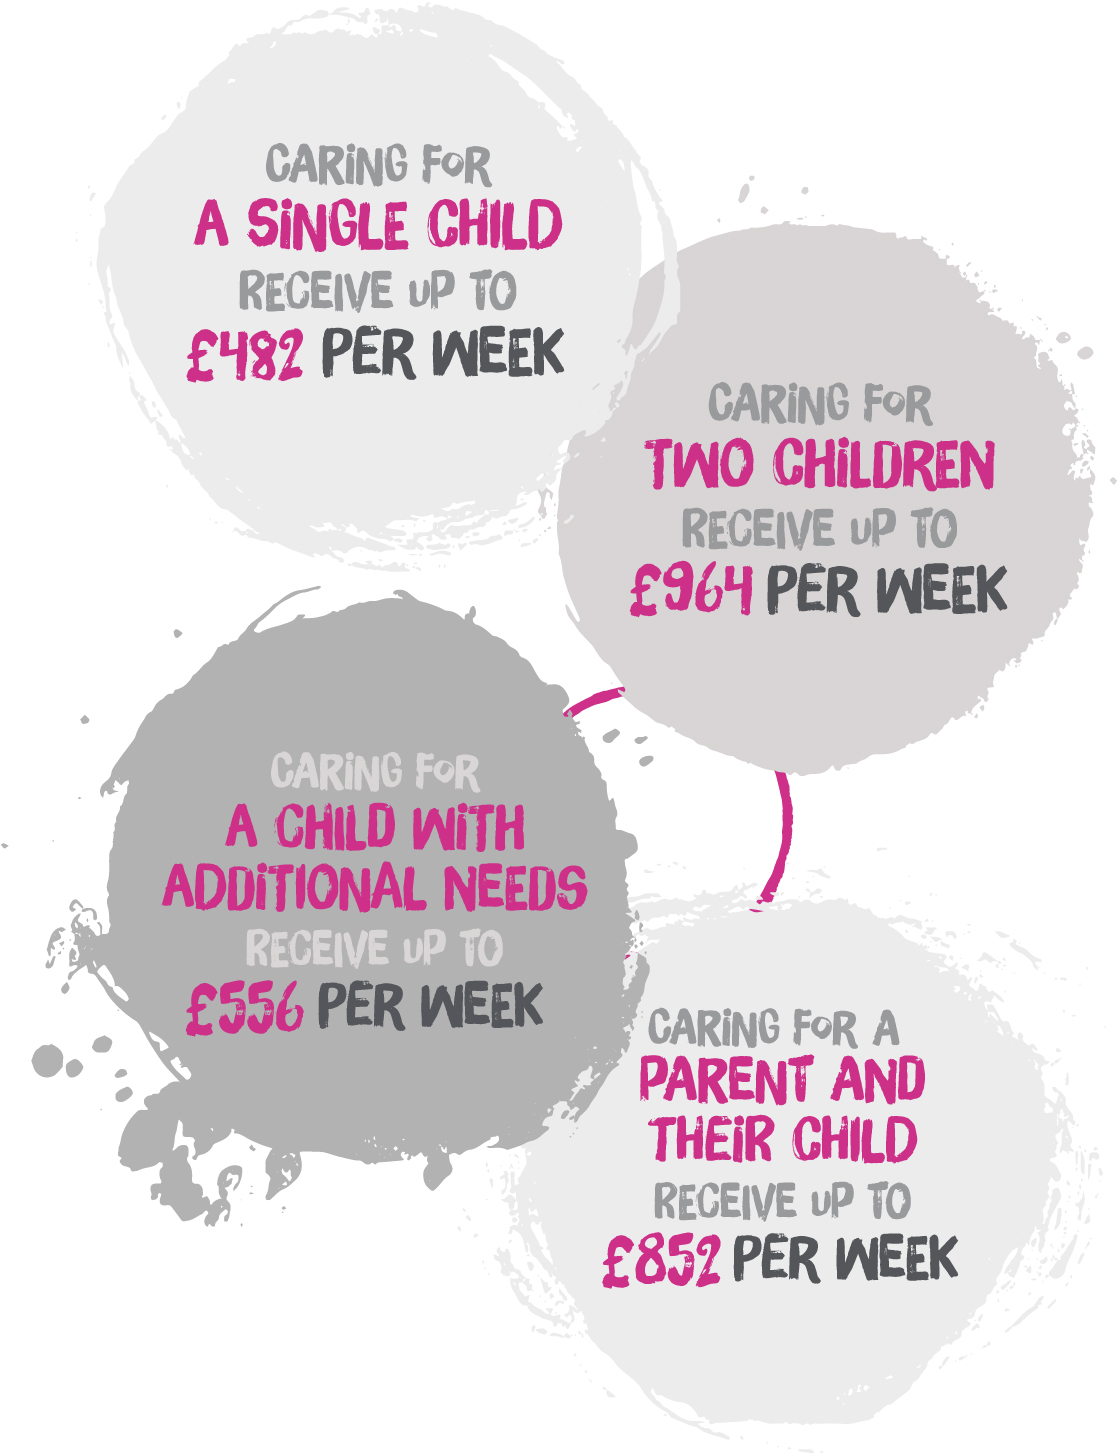 These are some examples of our fostering allowances/foster carer pay. Find out how much foster parents get paid.